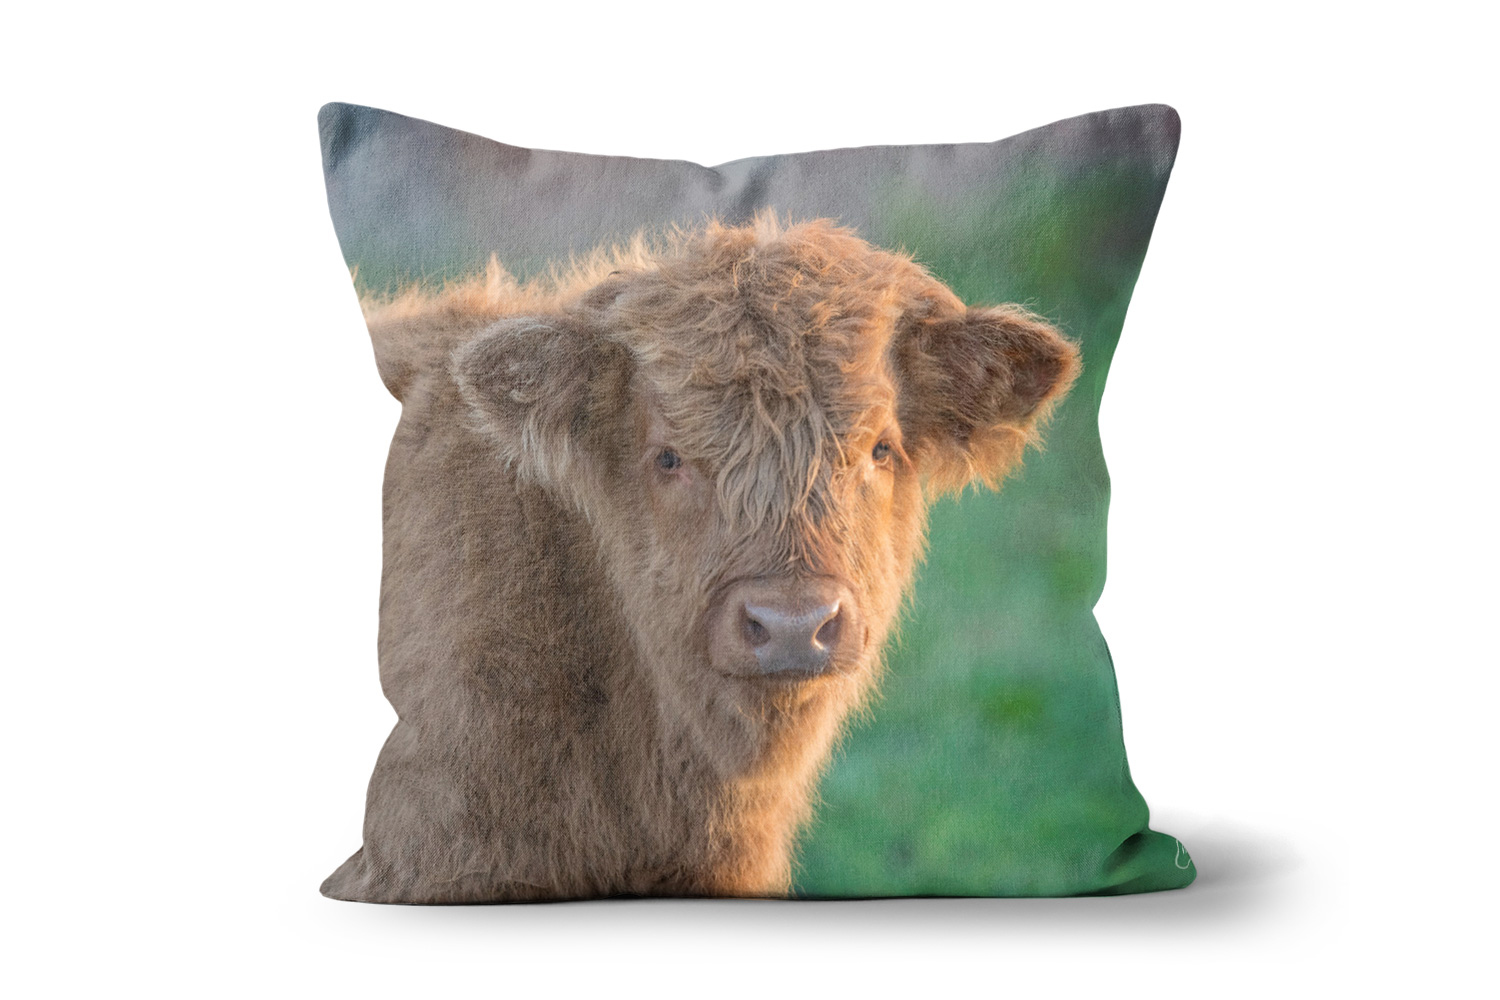 Baby Highland Cow 18in x 18in Throw Cushion